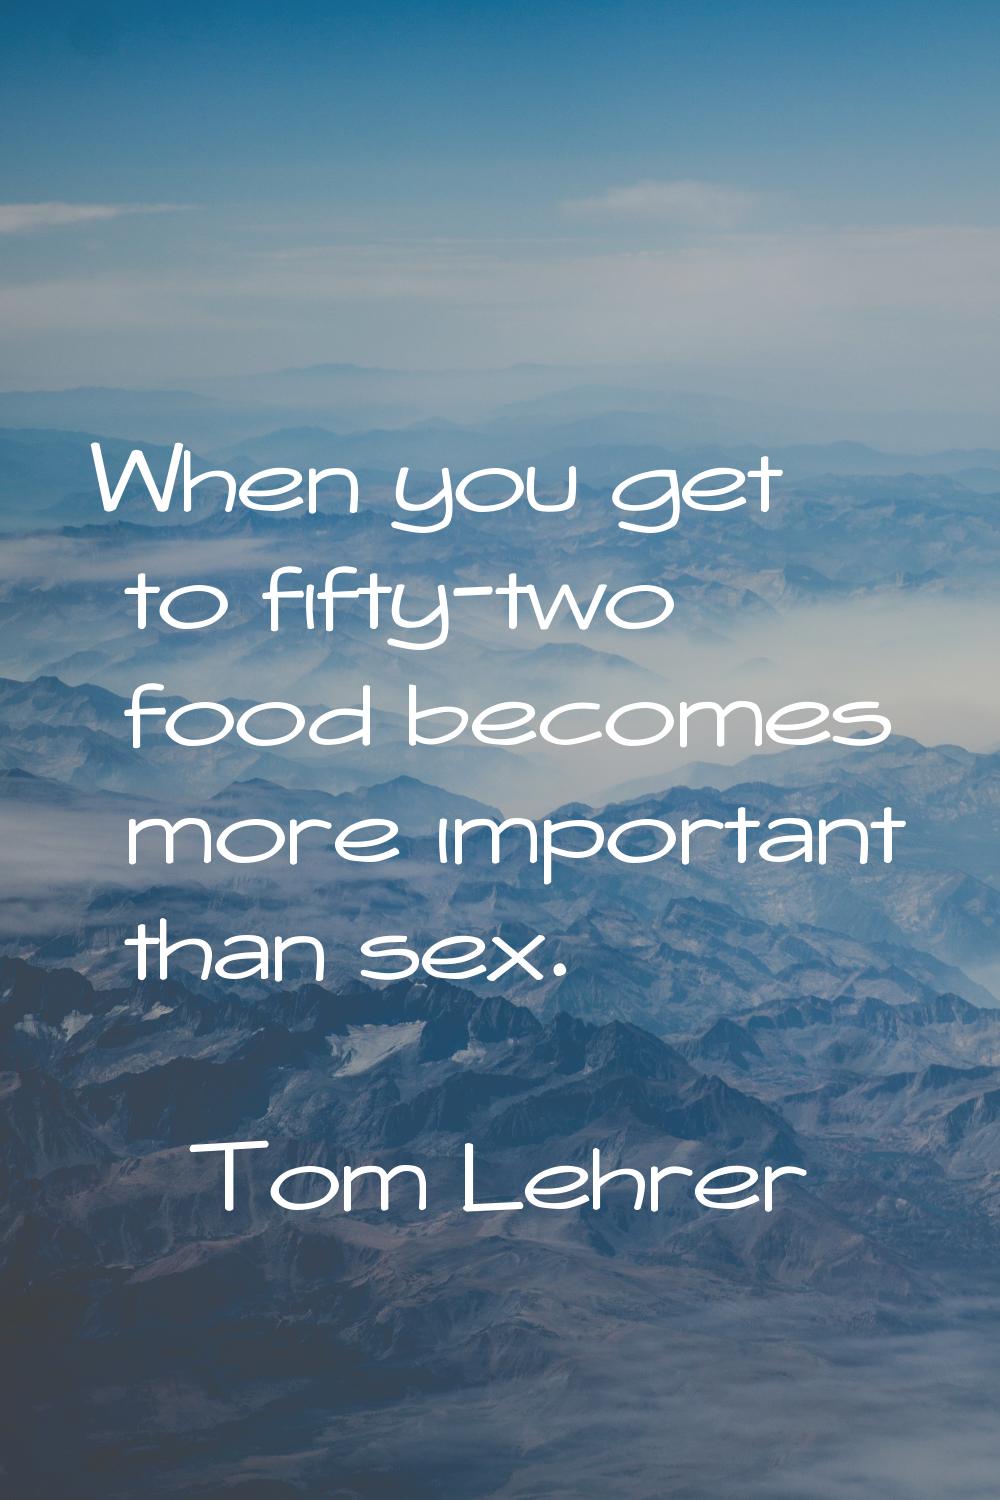 When you get to fifty-two food becomes more important than sex.